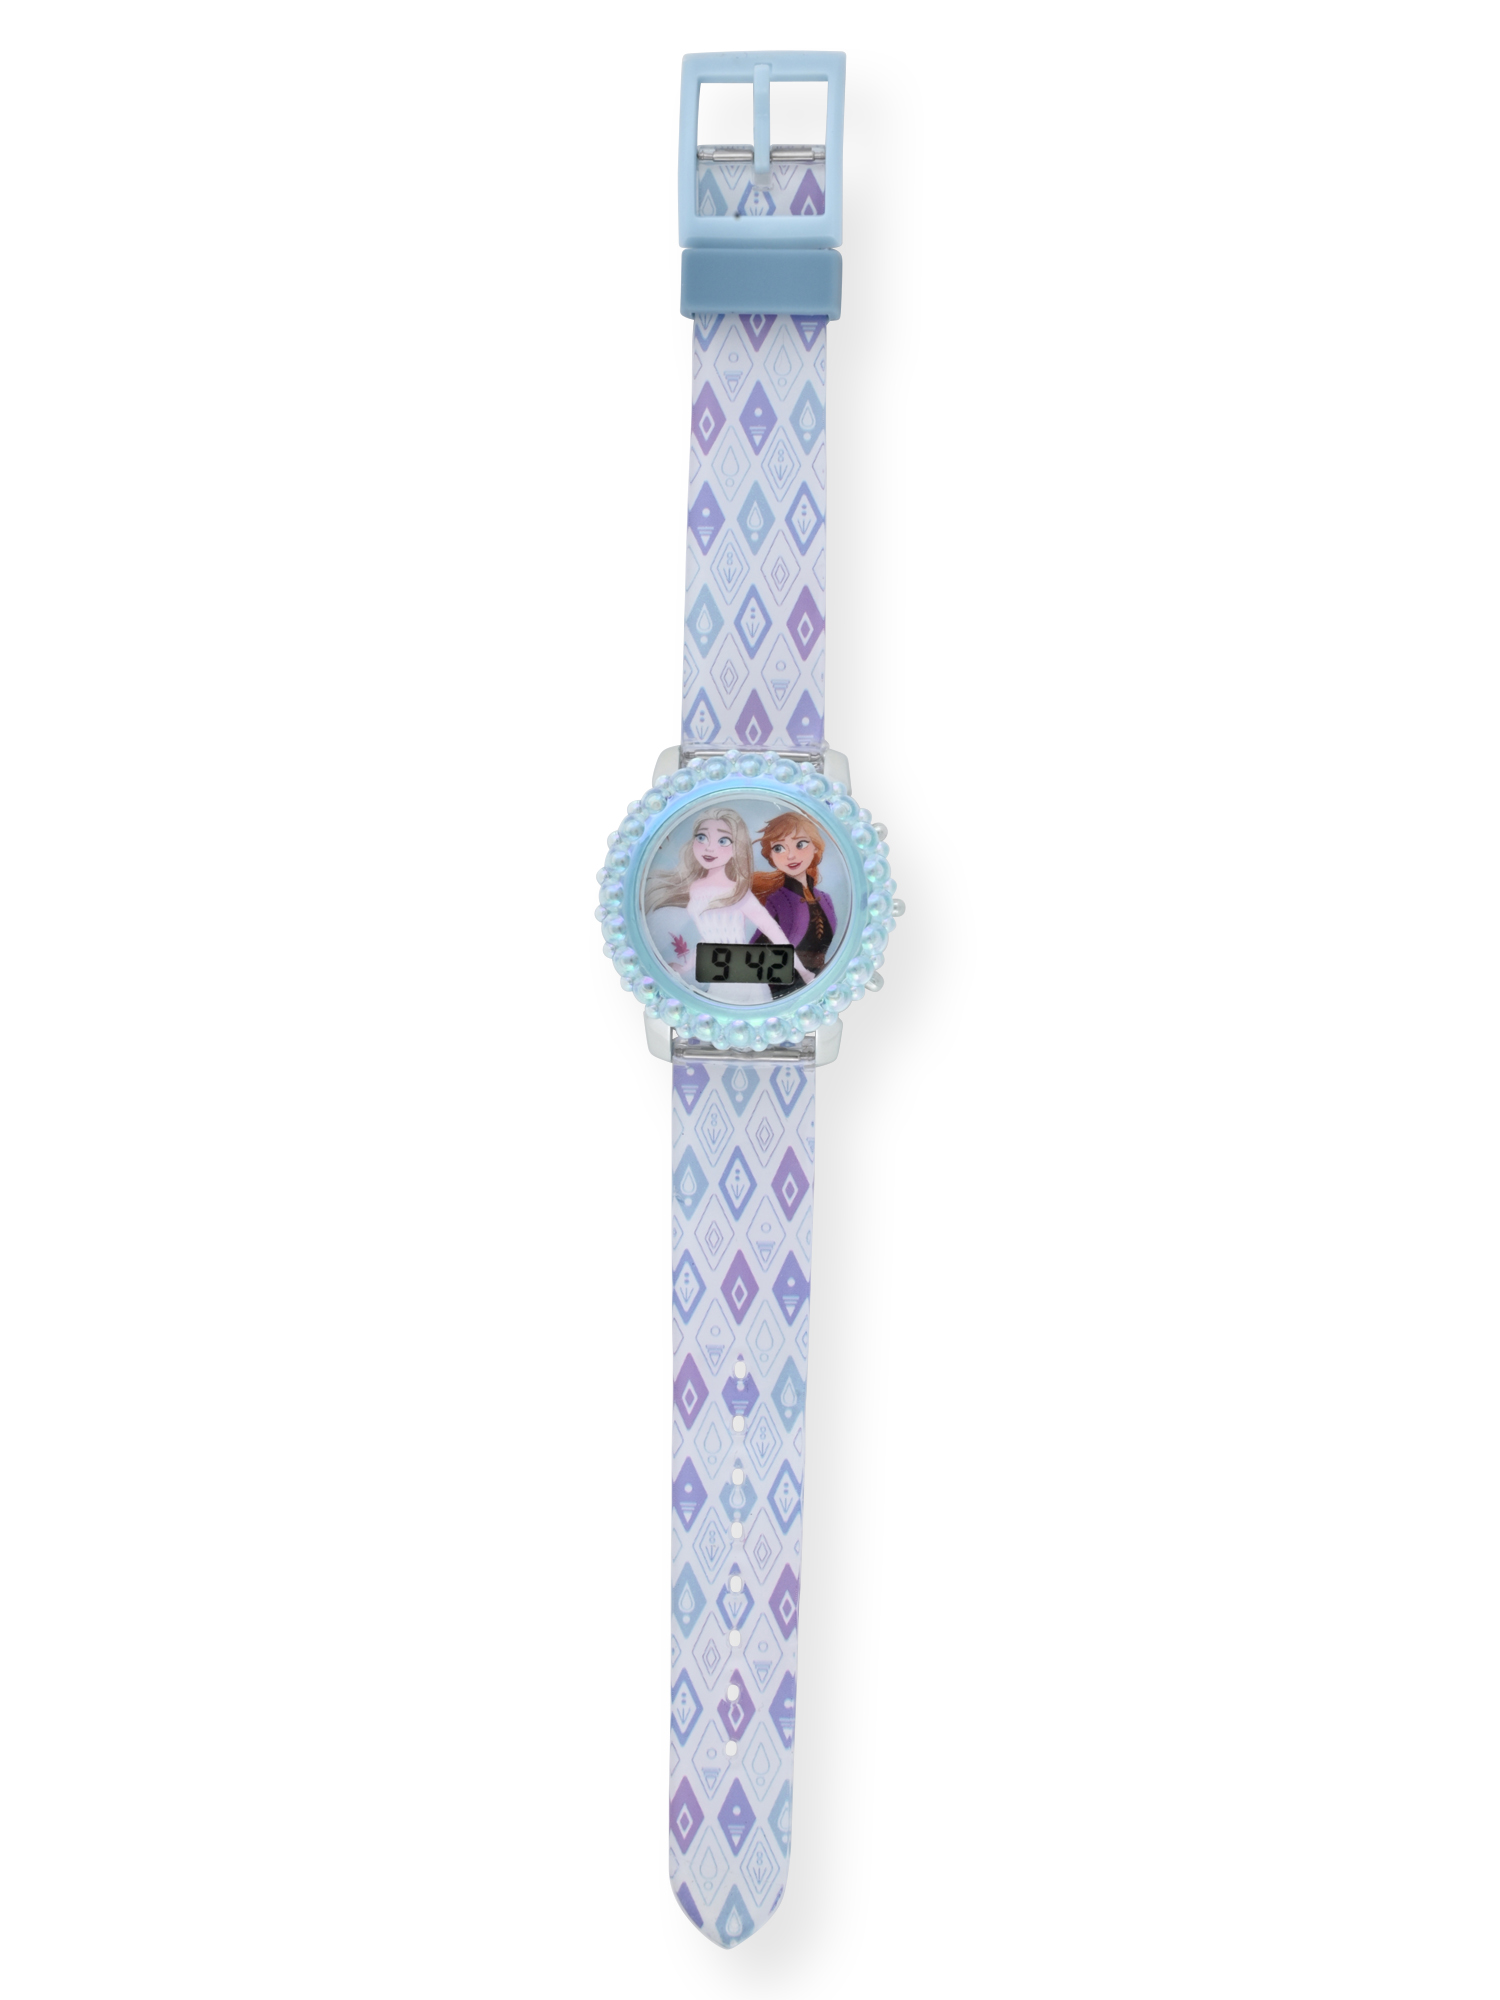 FZN4932WM Frozen Flashing Lights LCD Watch with Printed Strap - image 2 of 4